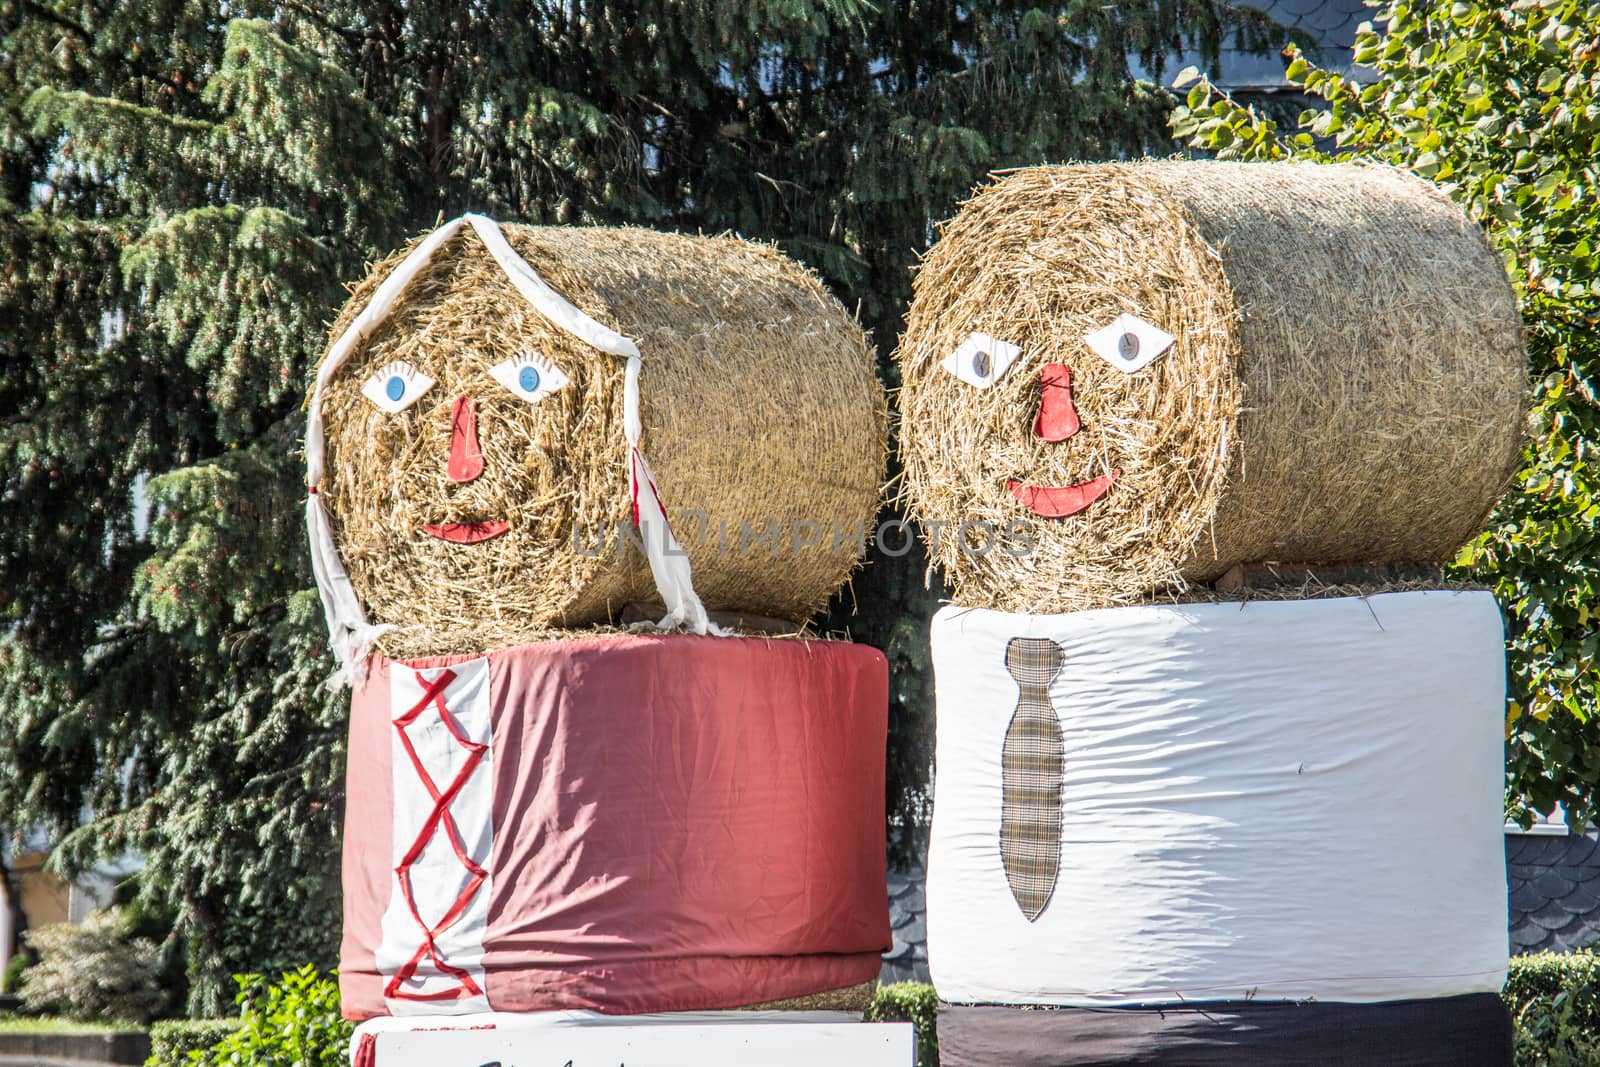 Bales of straw decorated as dolls by Dr-Lange